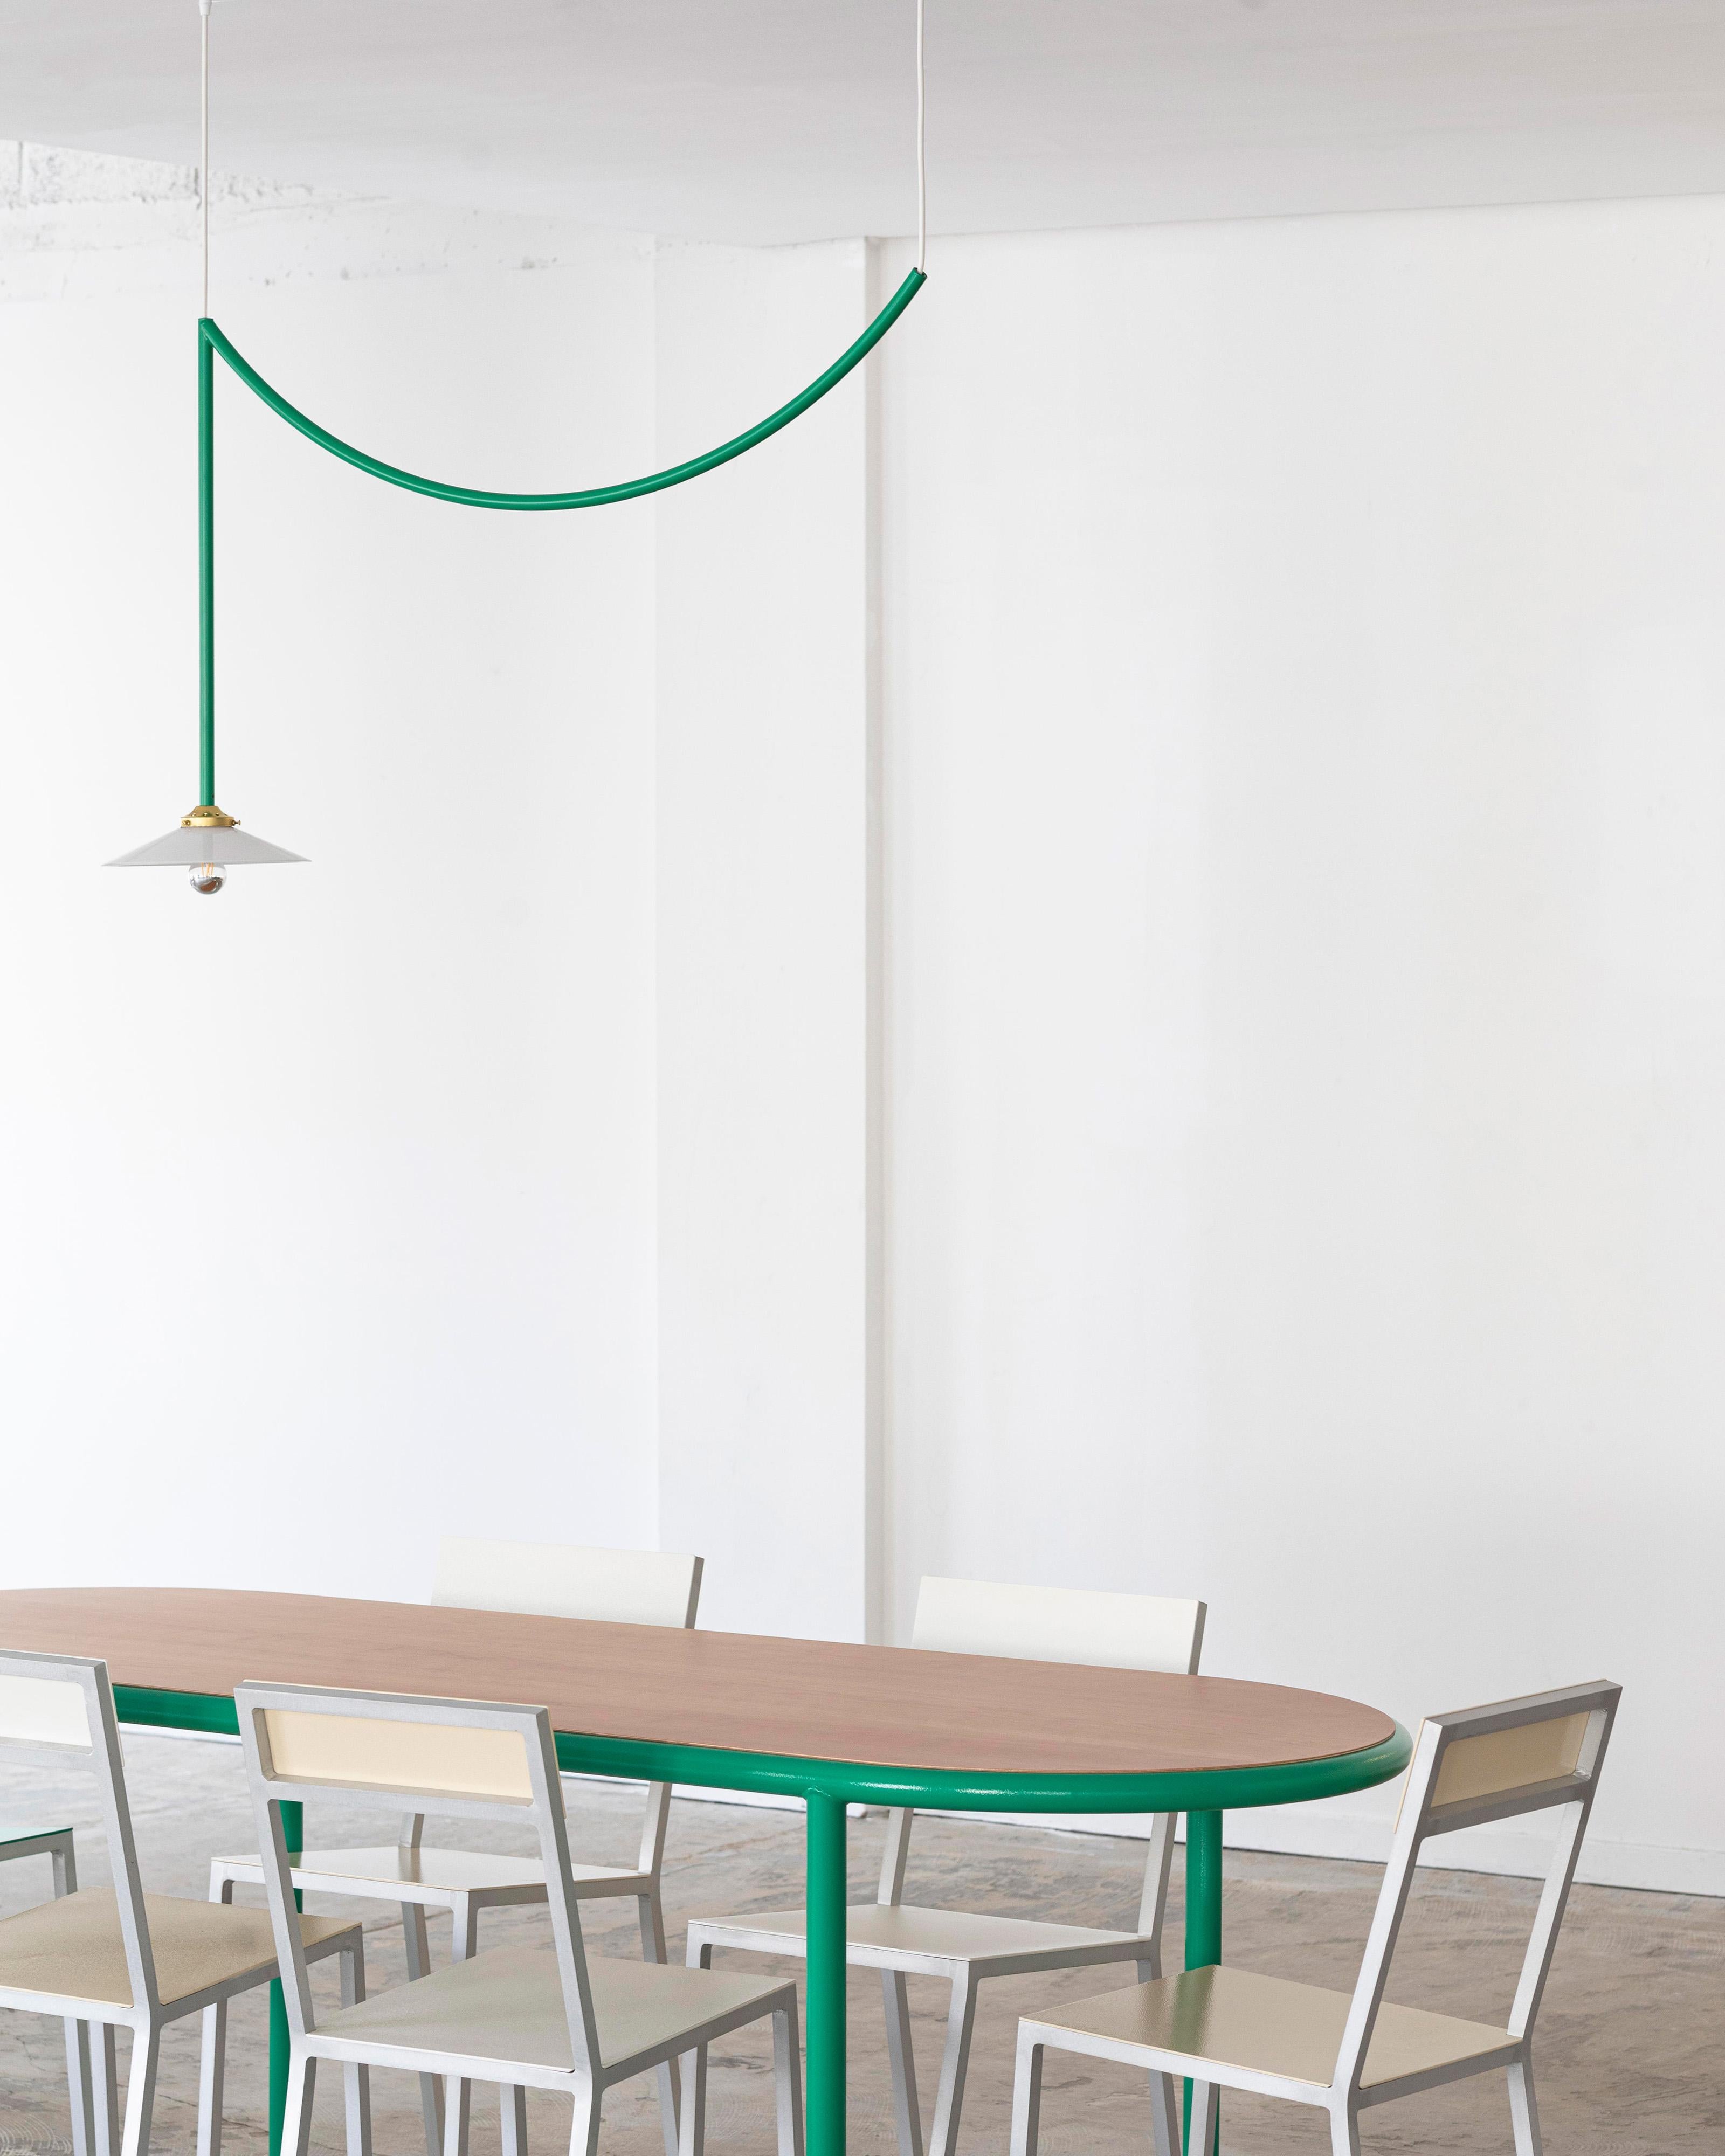 Cailing Lamp N°3 by Muller Van Severen x Valerie Objects

Dimensions: H. 105 X 150 X 25
Finish: Green

specifications
fitting type: e27
bulb replaceable: yes
number of fittings: 1
dimmable: no
cable length: 3 meter
switch: no

material: 
— lamp